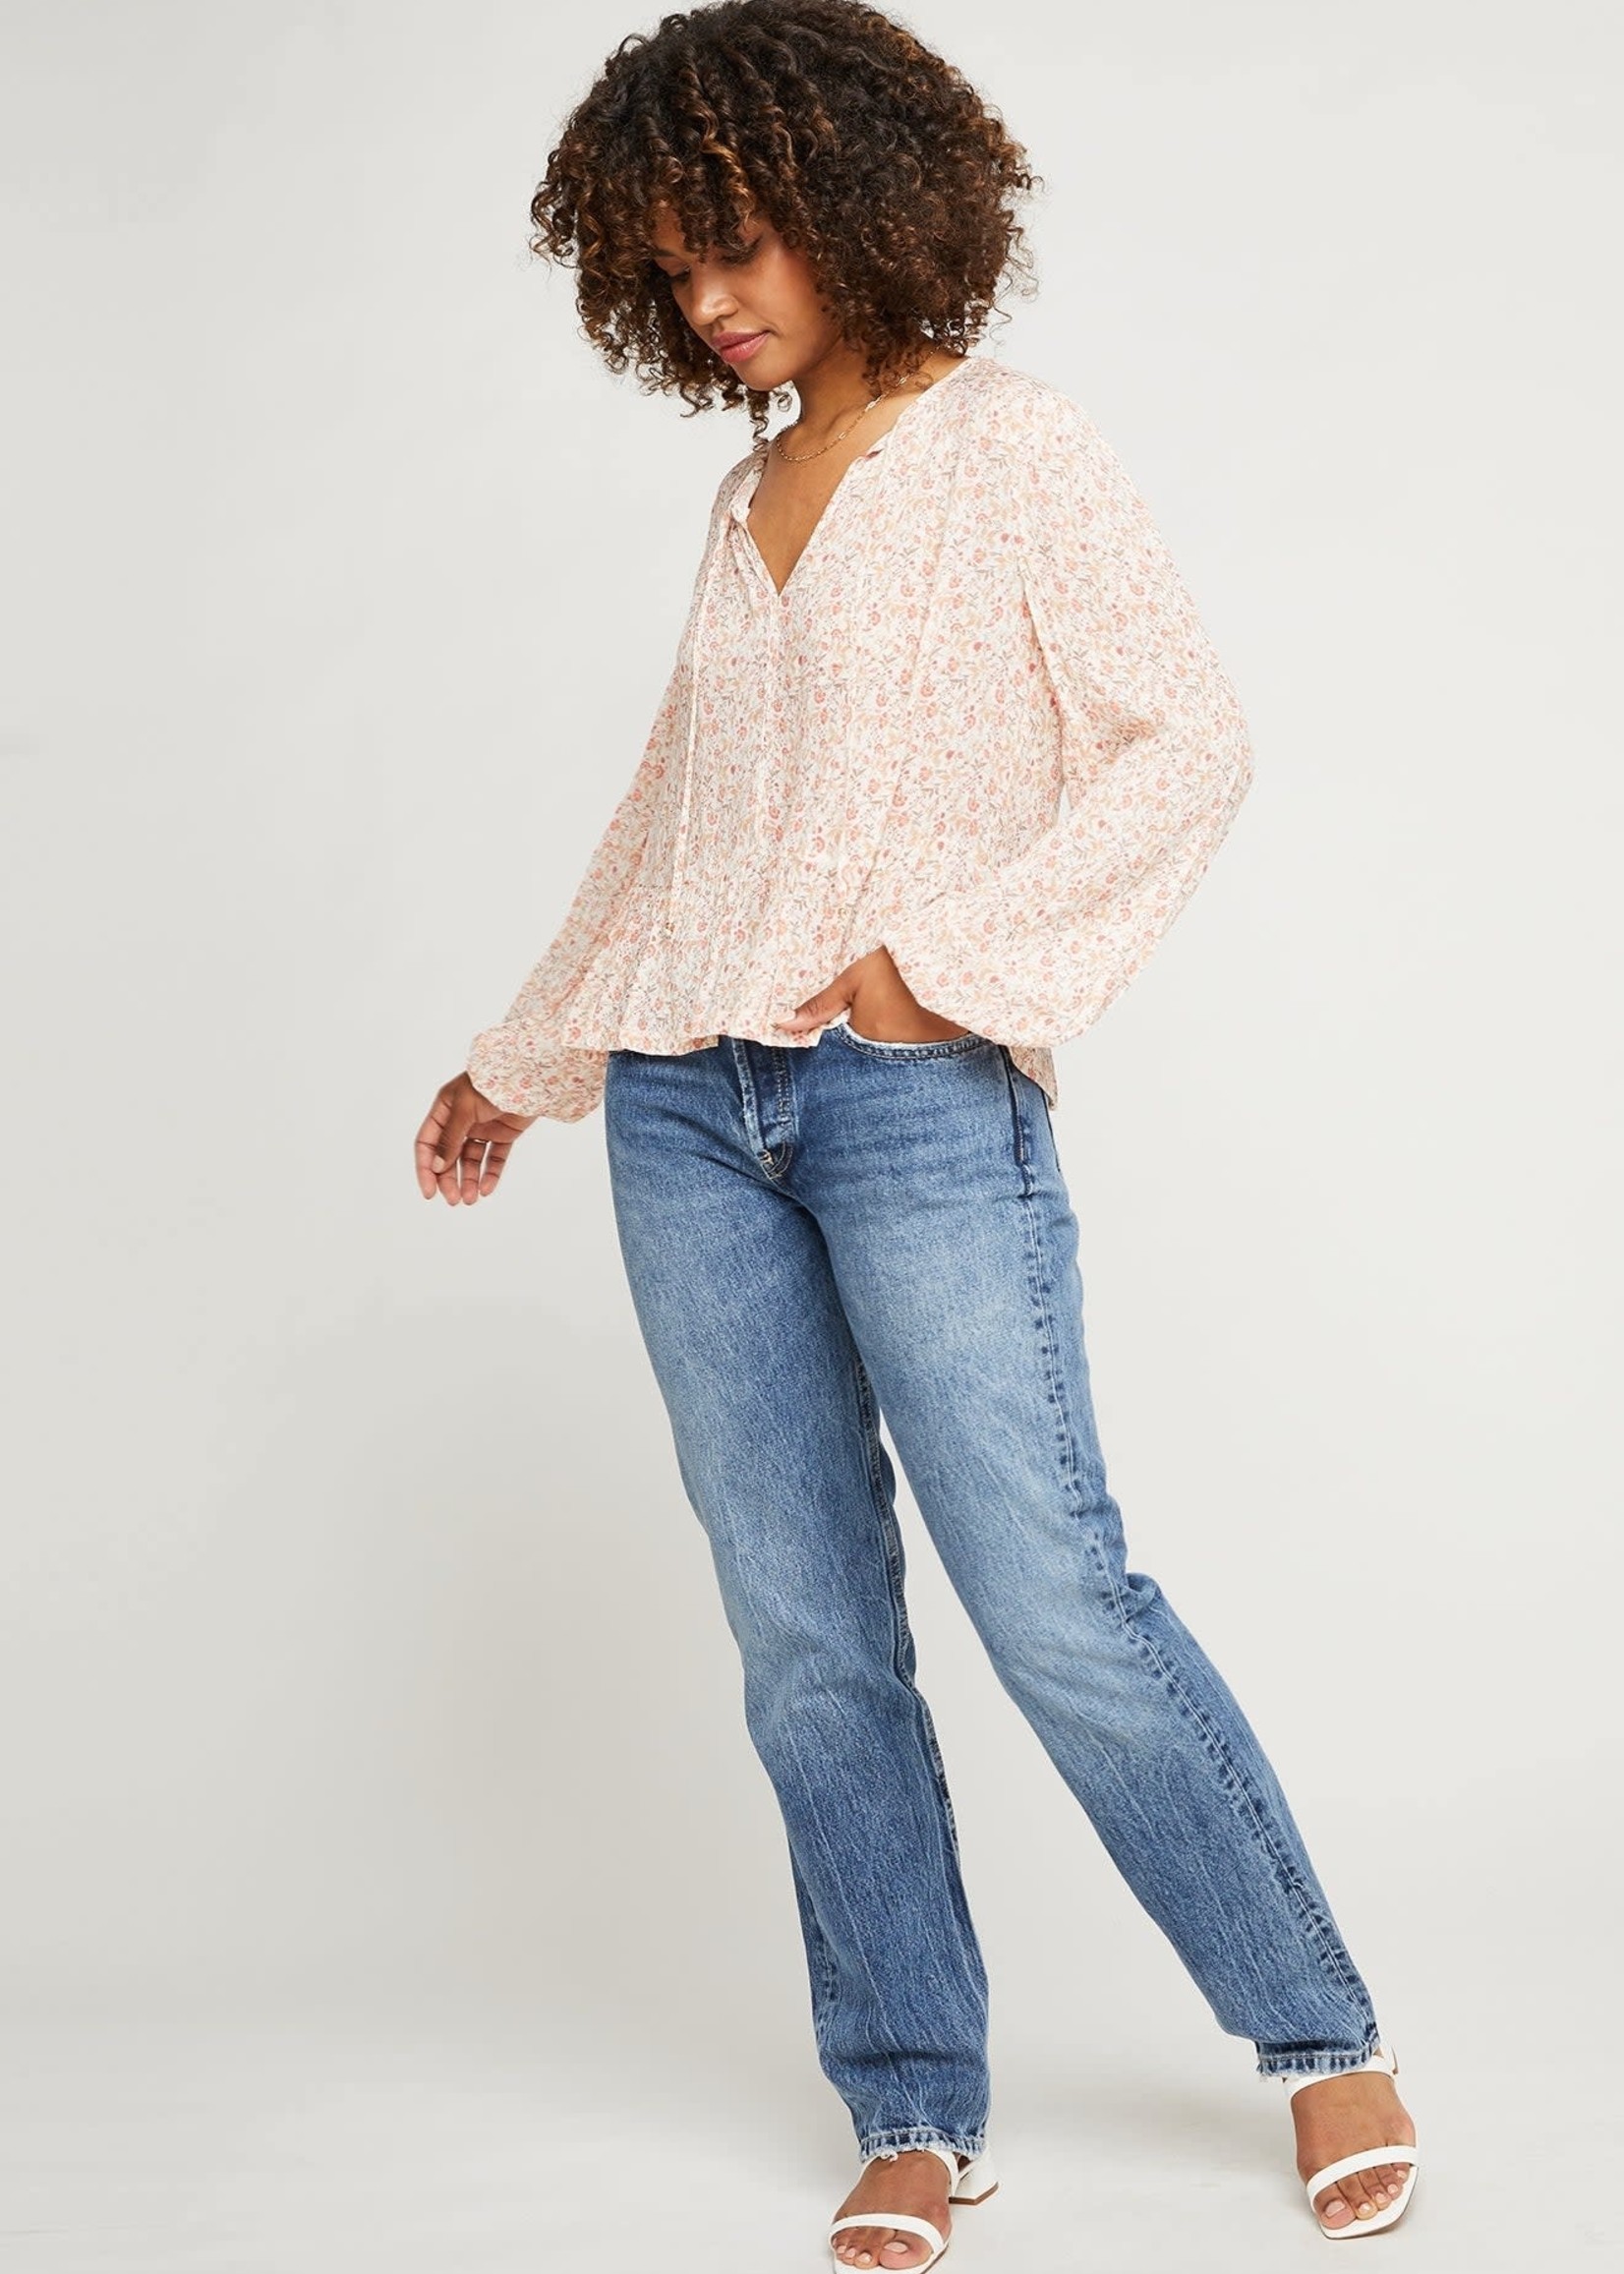 Gentle Fawn Maddie Blouse